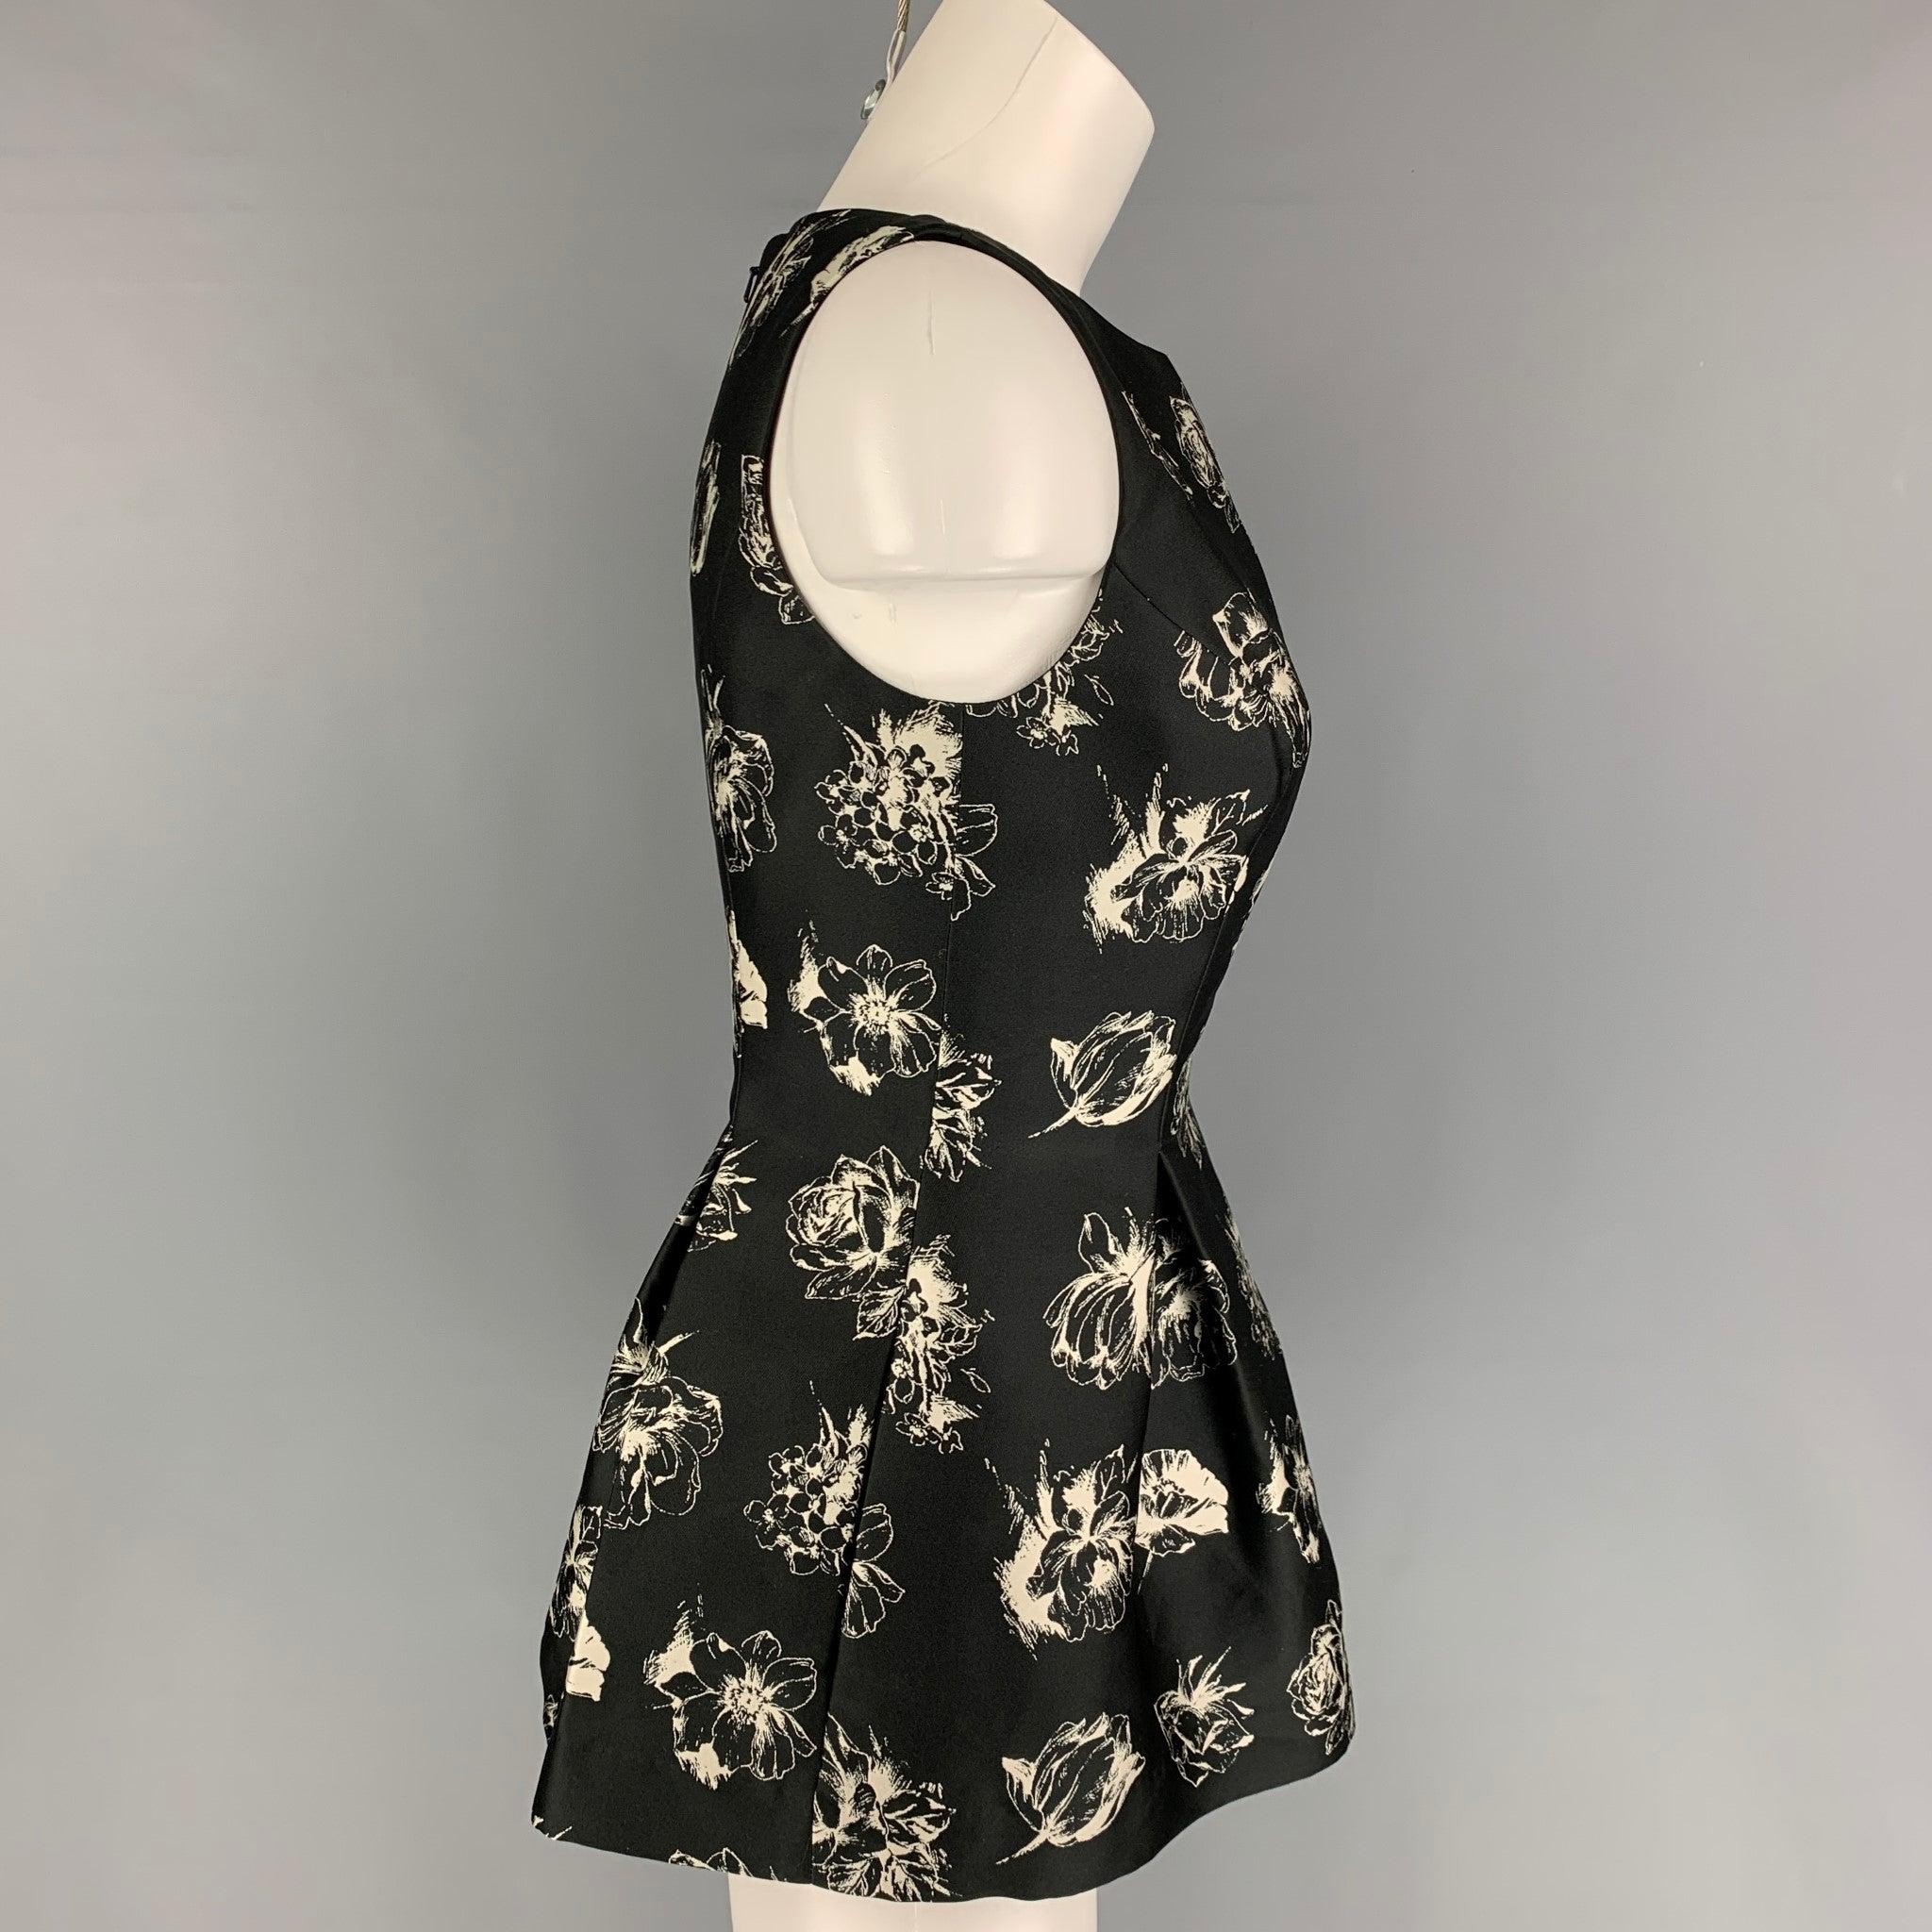 LELA ROSE blouse comes in a black & whit satin floral material featuring a peplum style, sleeveless, and a back zip up closure.
Very Good
Pre-Owned Condition. Fabric tag removed.  

Marked:   Size tag removed.  

Measurements: 
 
Shoulder: 13 inches